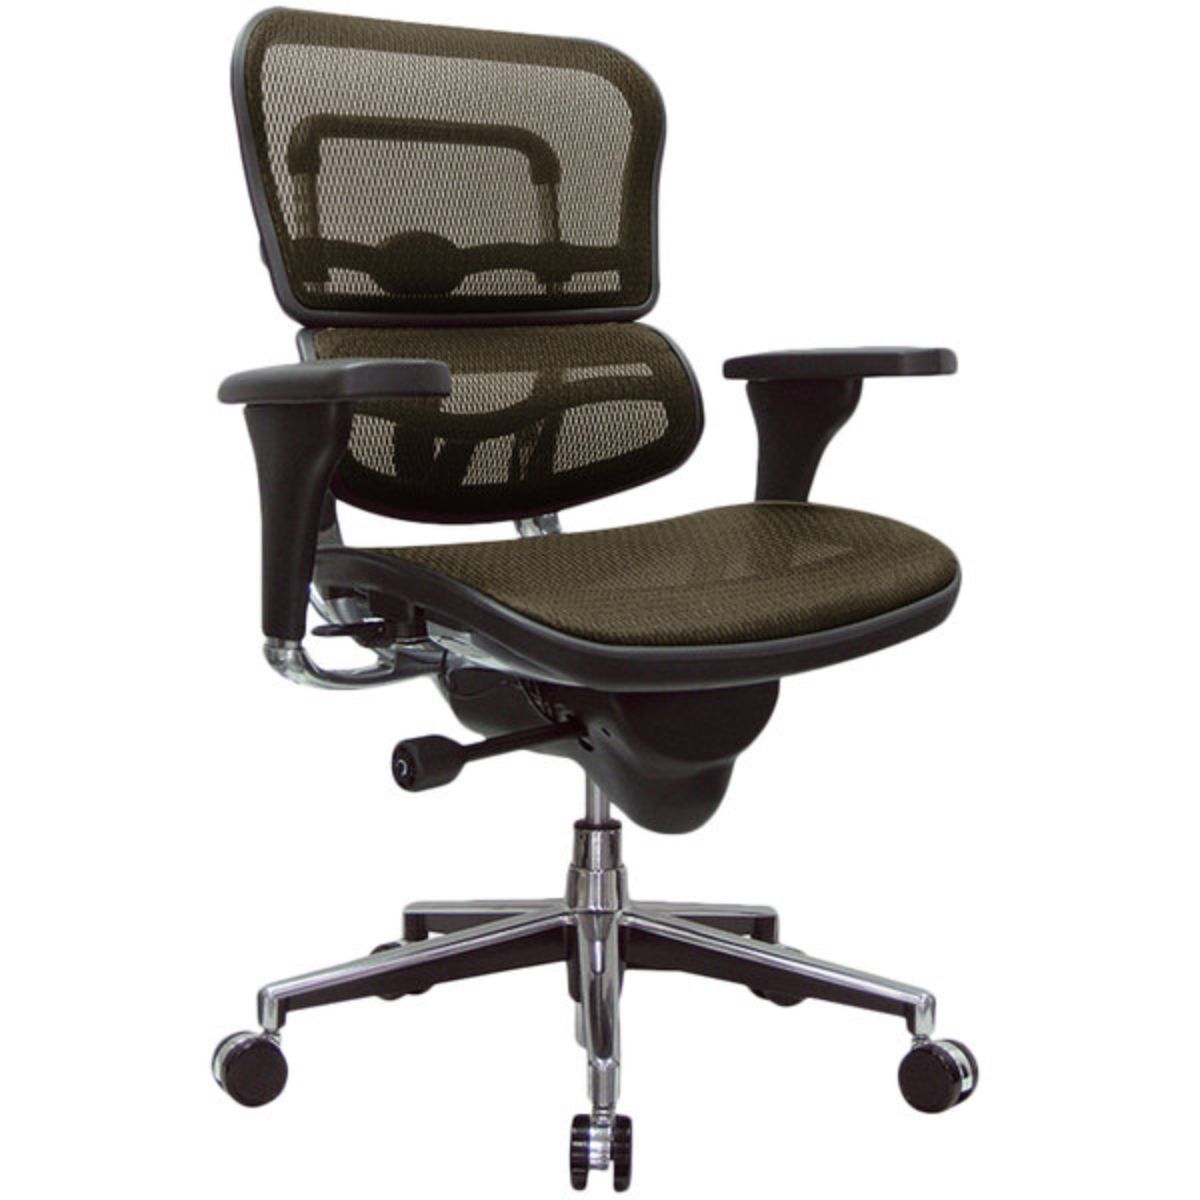 Orange and Silver Adjustable Swivel Mesh Rolling Office Chair-372399-1